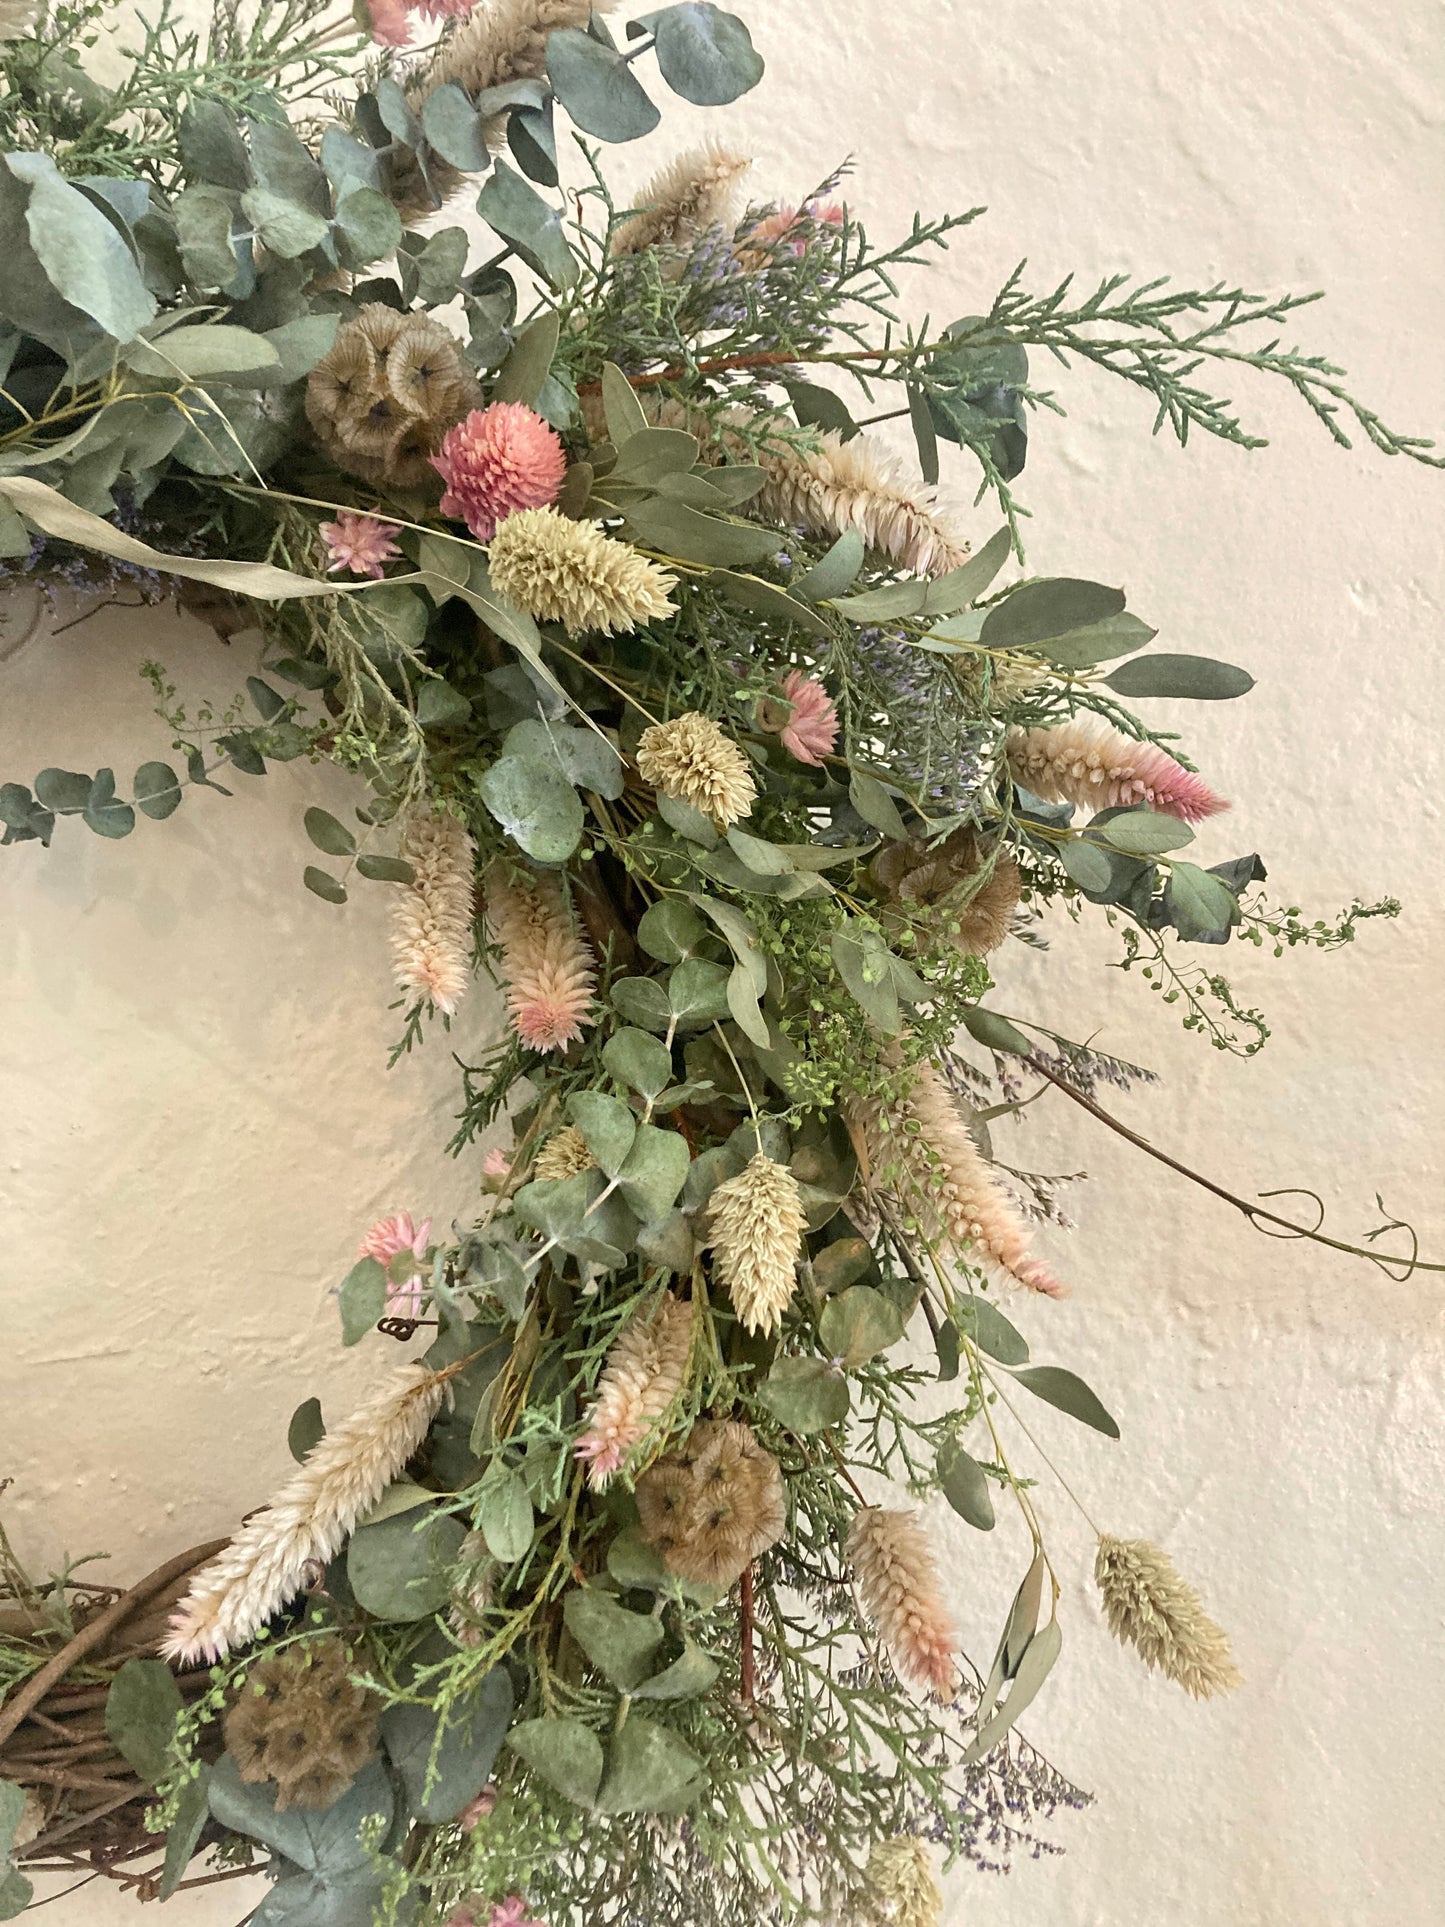 18" pale pink flowers with eucalyptus wreath